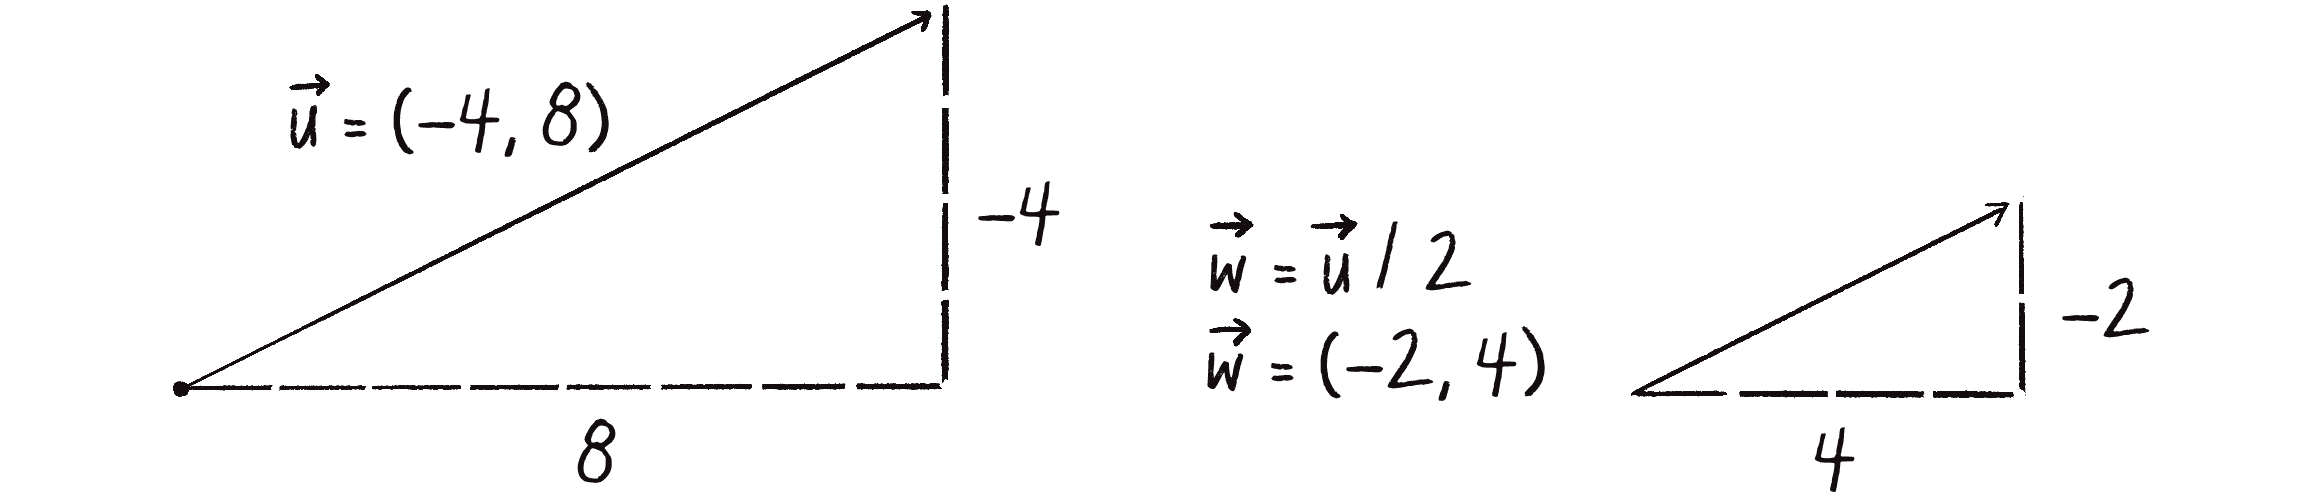 Figure 1.10: Scaling a vector with division